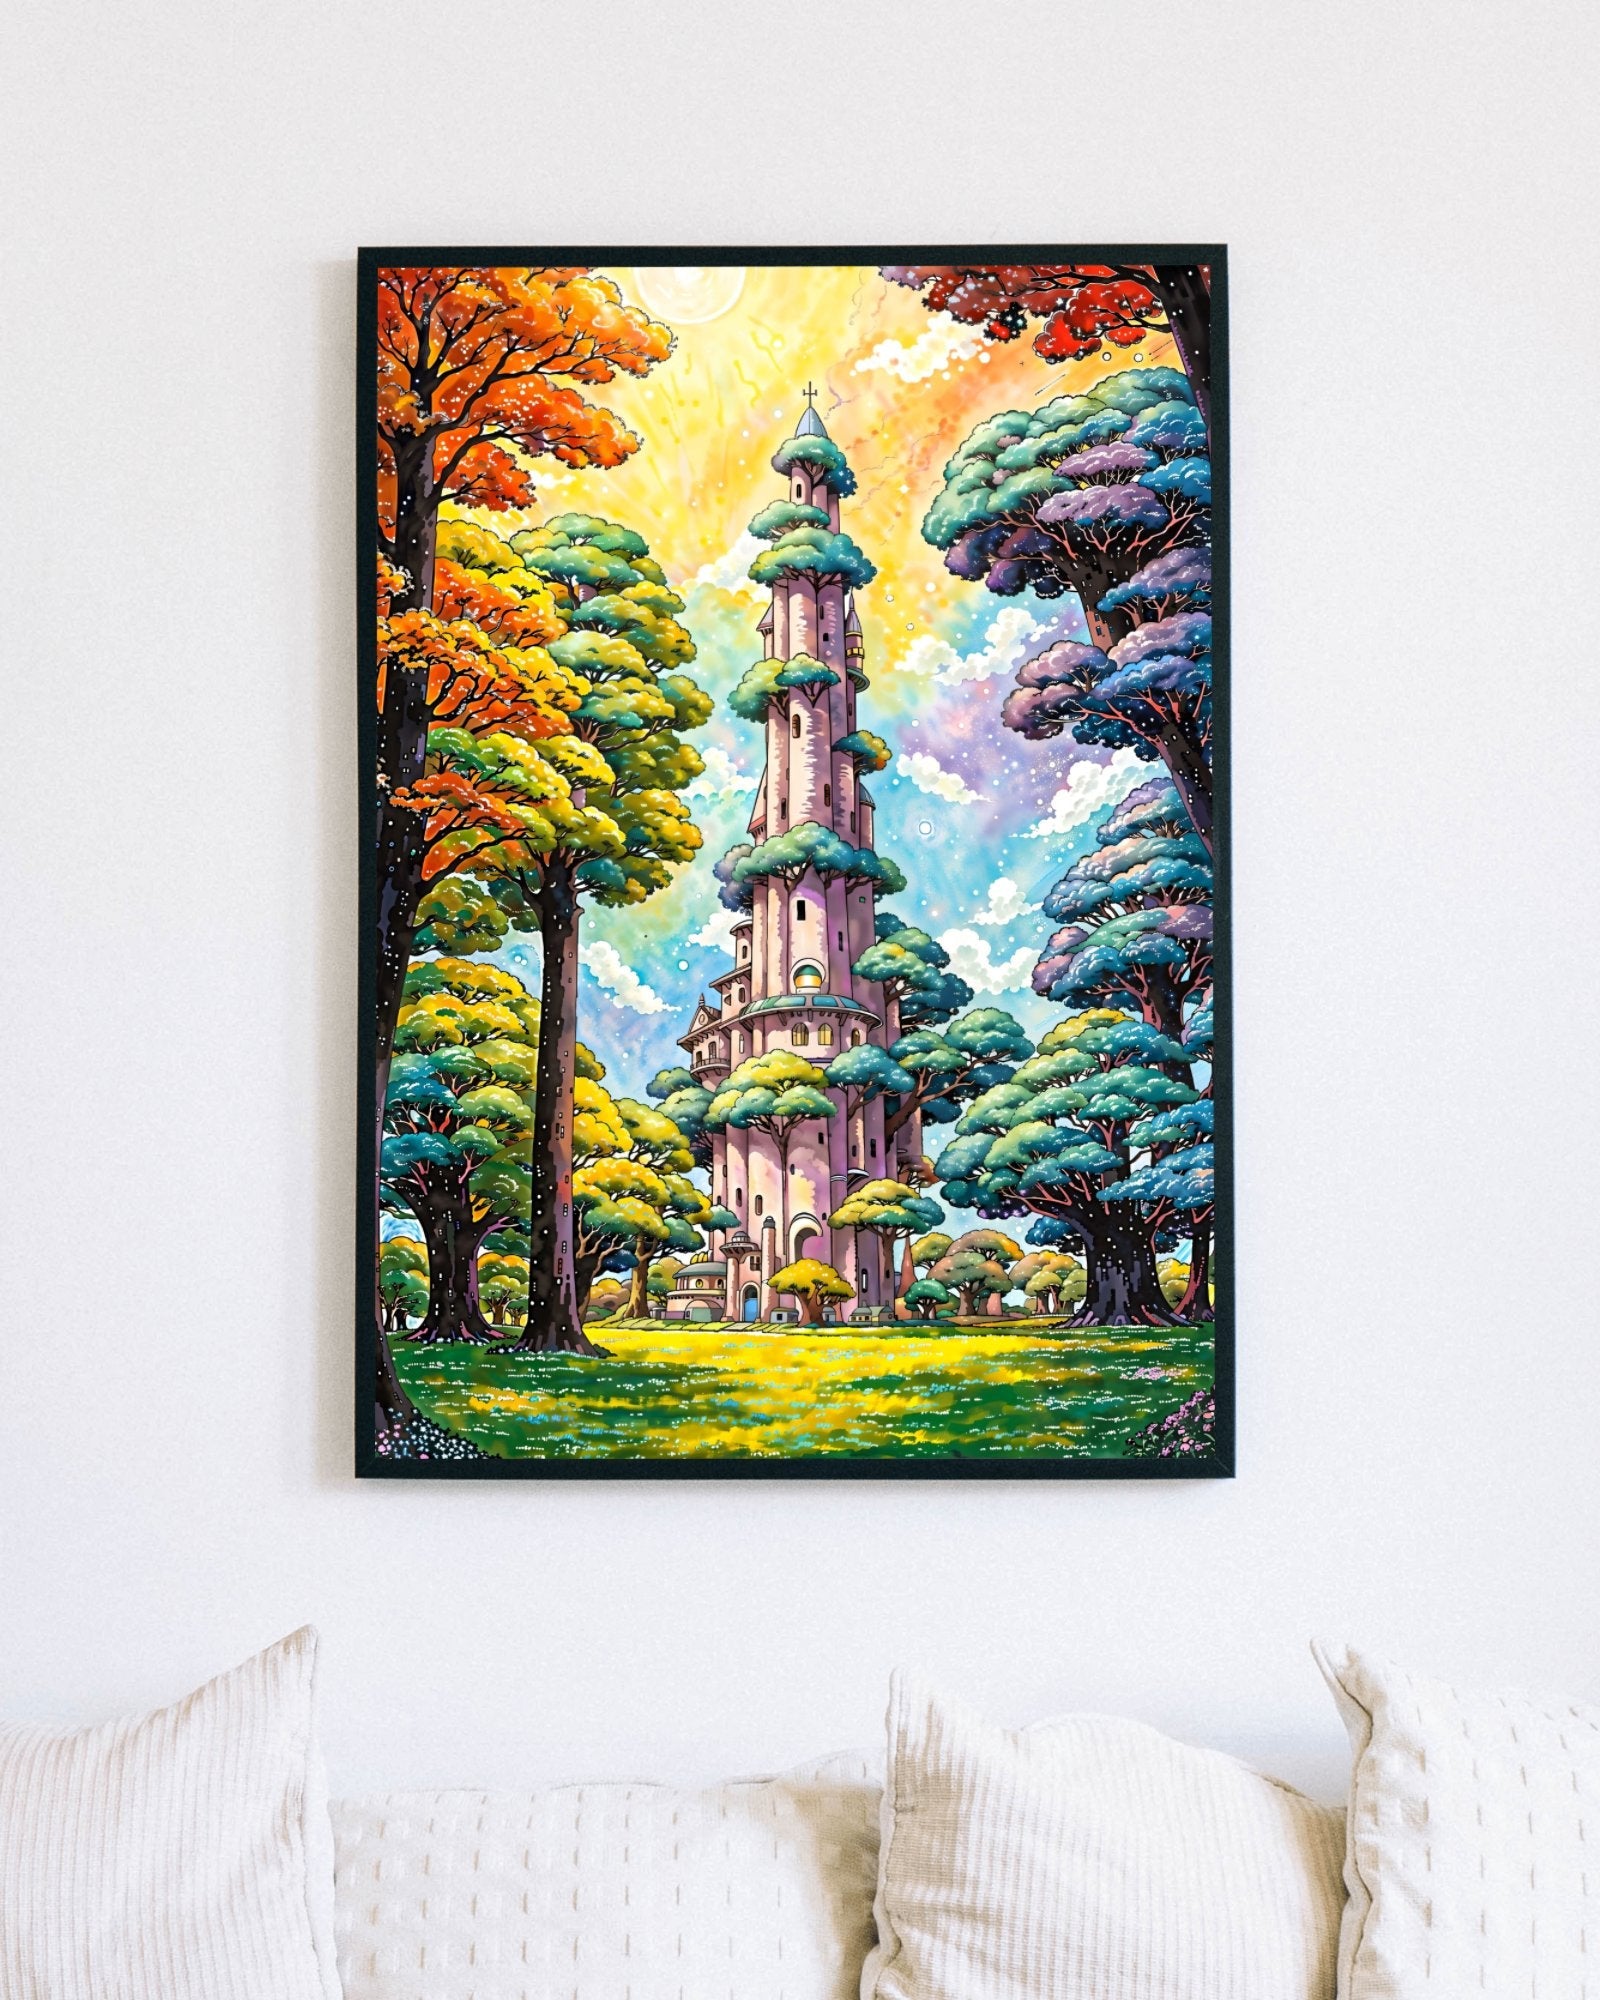 Autumn wizard's tower - Poster - Ever colorful